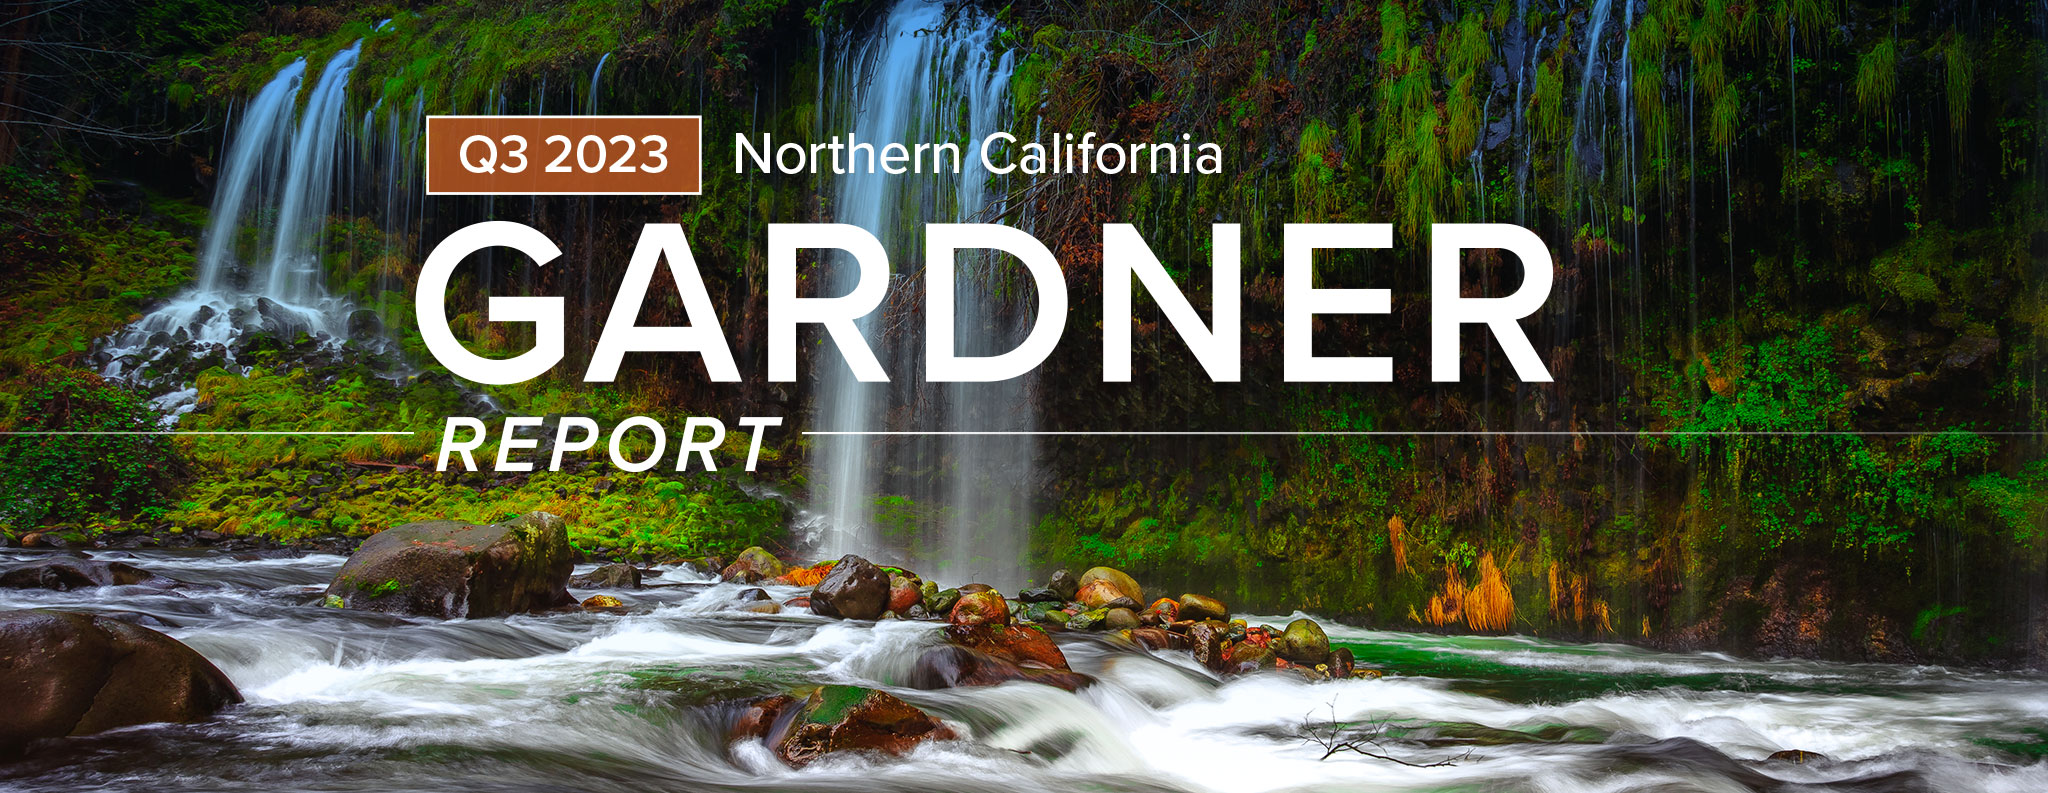 A photo of a riverbed with waterfalls flowing into it with the words “Q3 2023 Northern California Gardner Report” written over it.